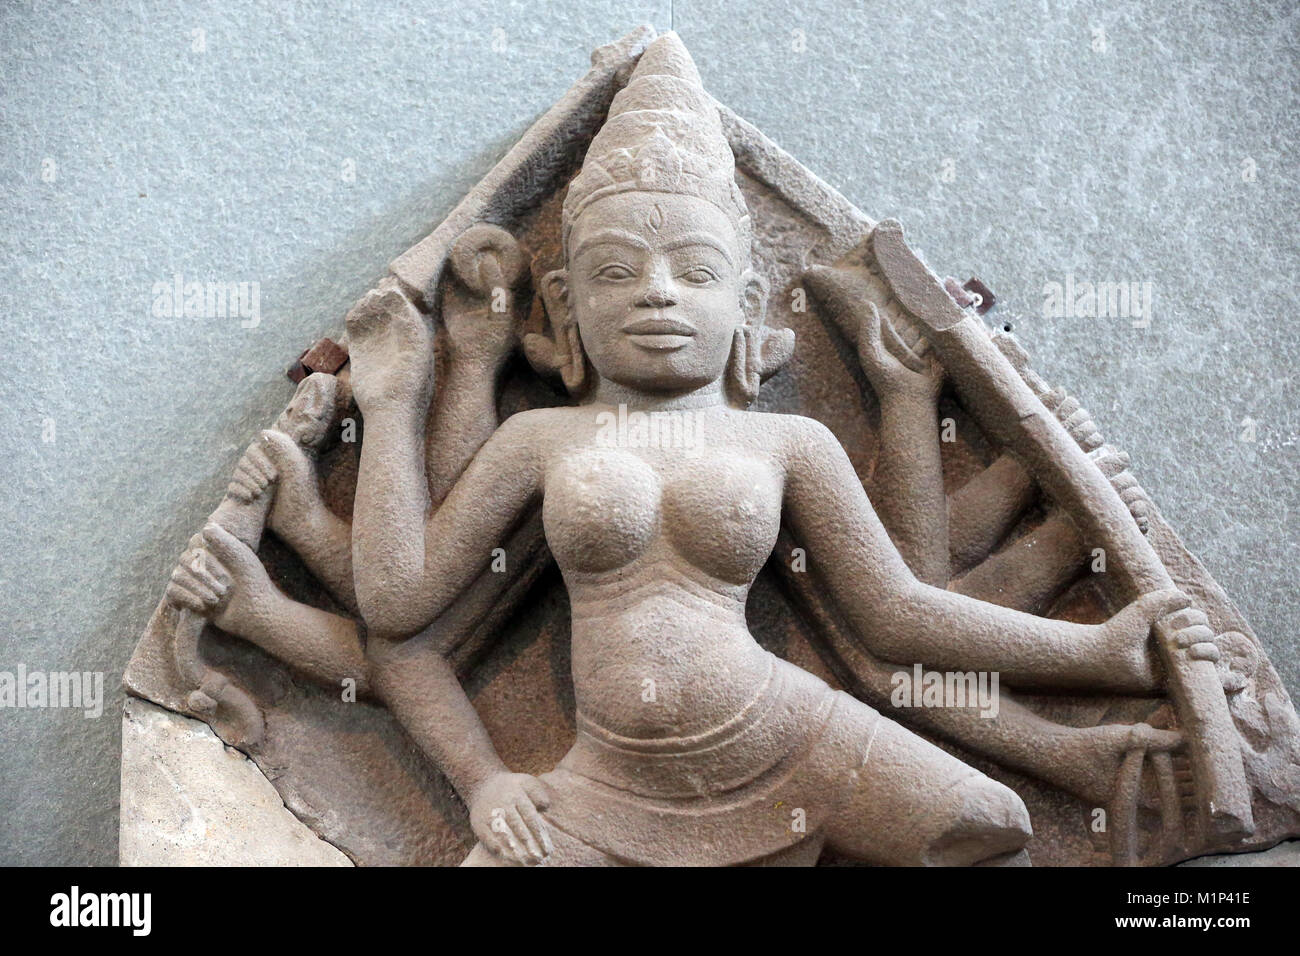 Durga statue from the 10th century, Museum of Cham Sculpture, Danang, Vietnam, Indochina, Southeast Asia, Asia Stock Photo